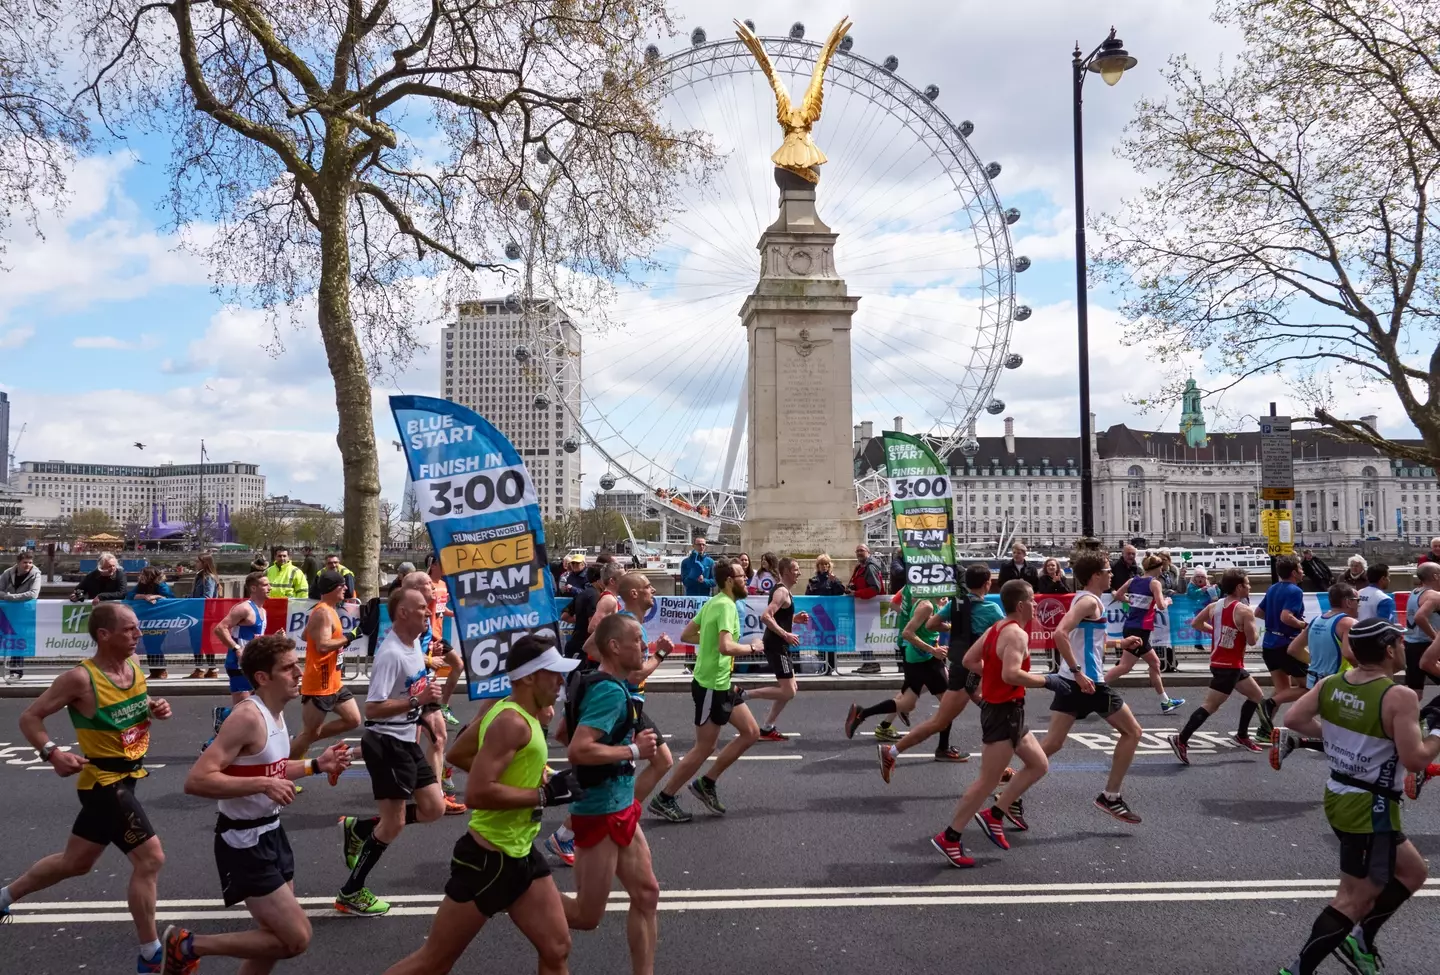 Stephen Shanks tragically died after taking part in the London marathon.